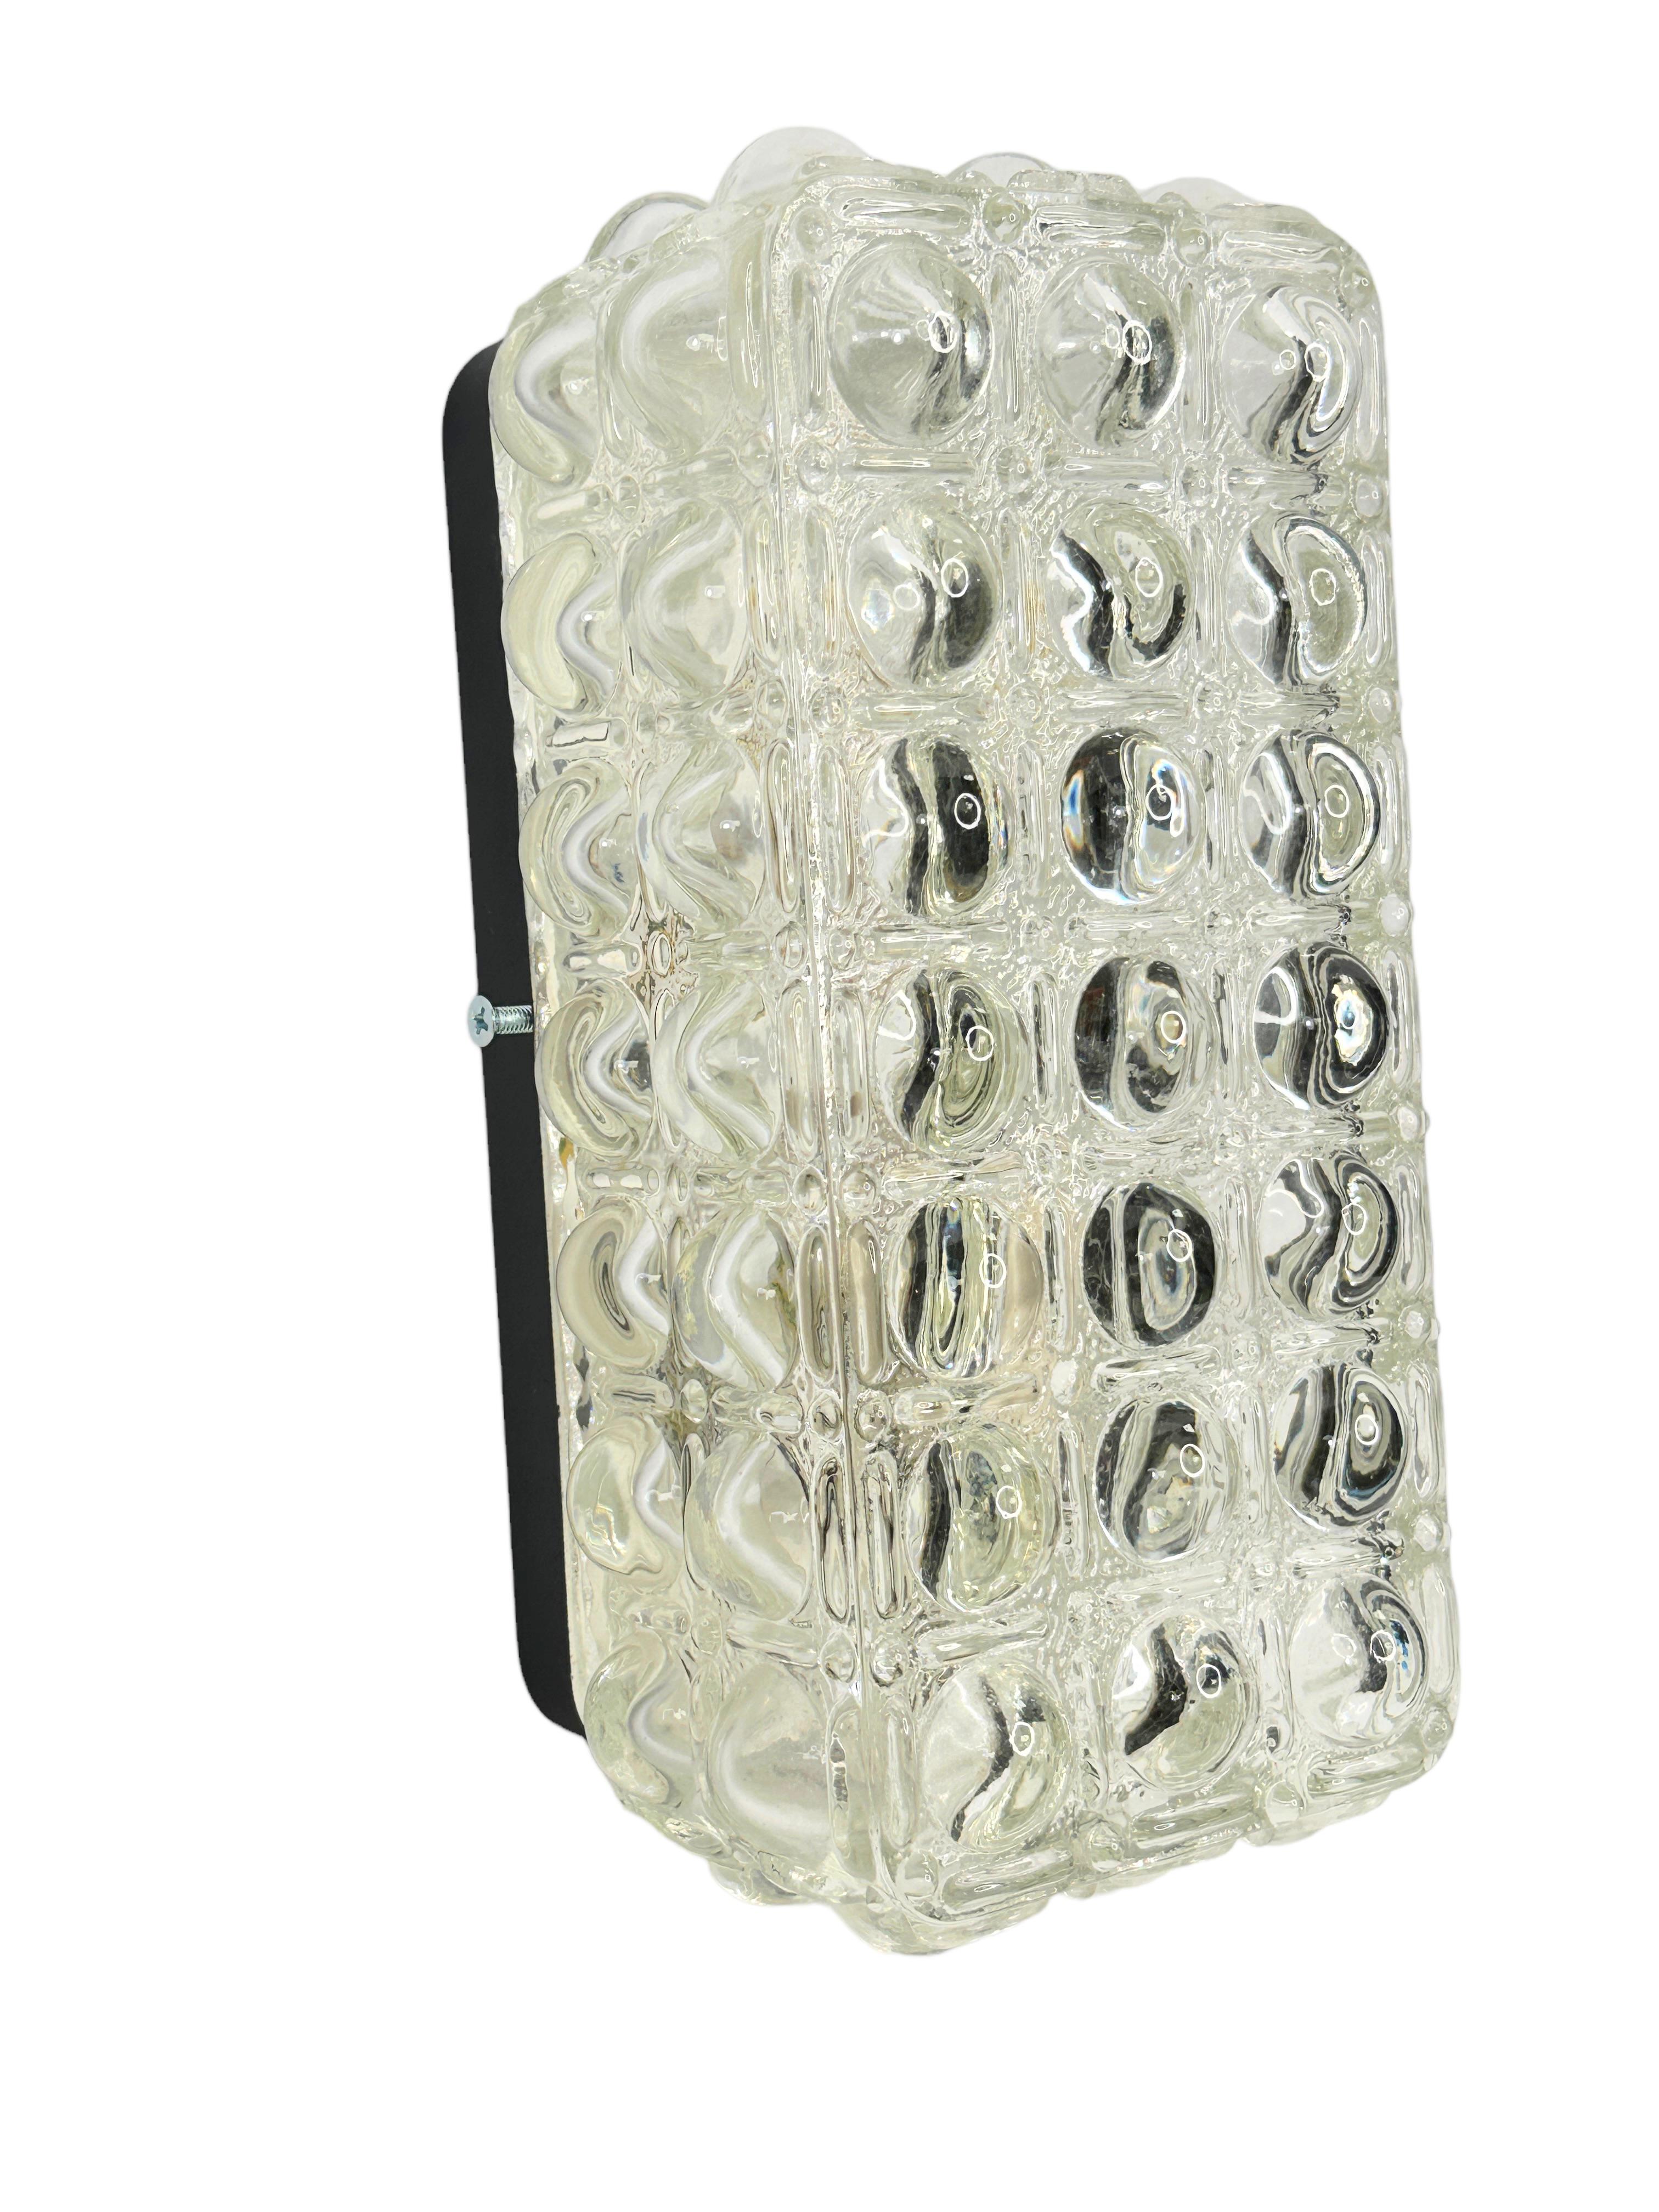 Petite sconce manufactured probably by Glashütte Limburg. It is an clear glass on a black lacquered metal frame. The fixture has one European style E127 socket. It requires one European E27 / 110 Volt Edison bulb, up to 60 watts. Found at an estate